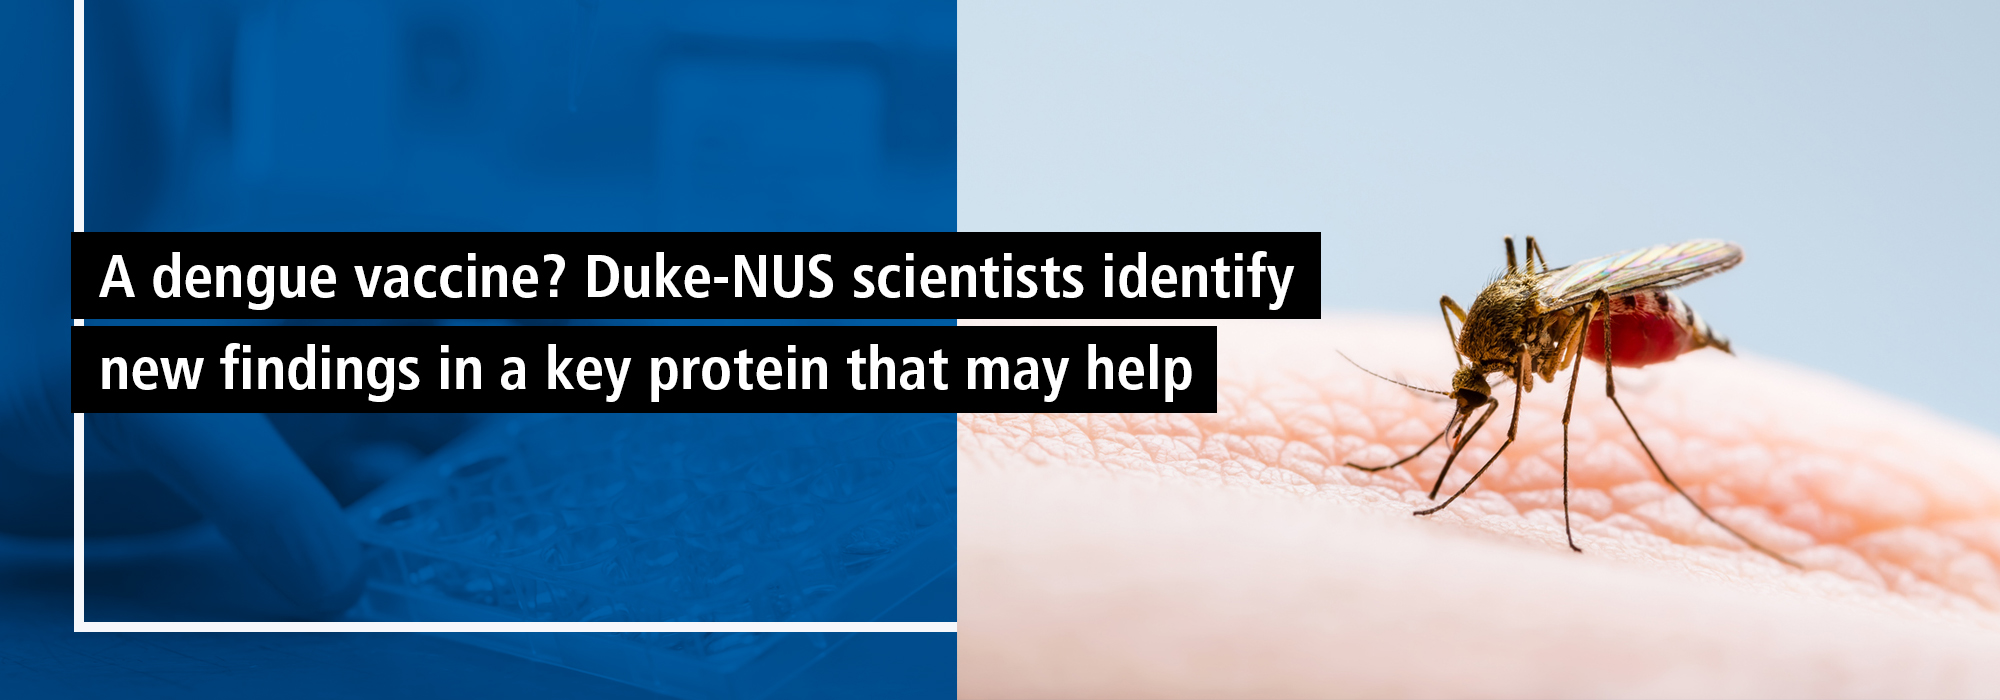 A dengue vaccine? Duke-NUS scientists identify new findings in a key protein that may help